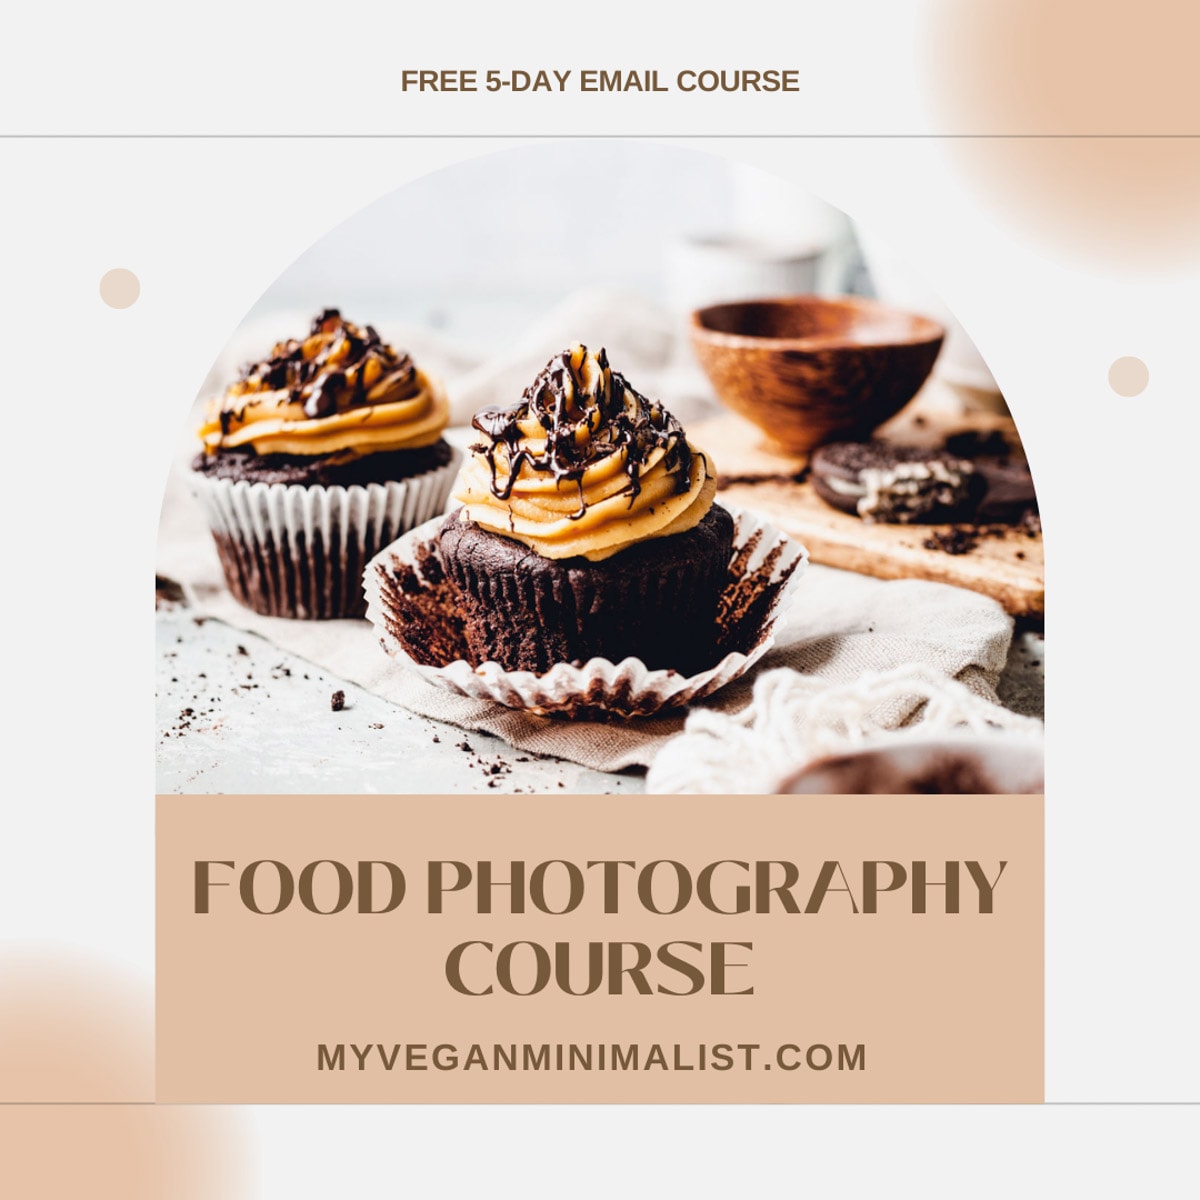 A graphic showing a chocolate cupcake with the text Food Photography Course in the middle.